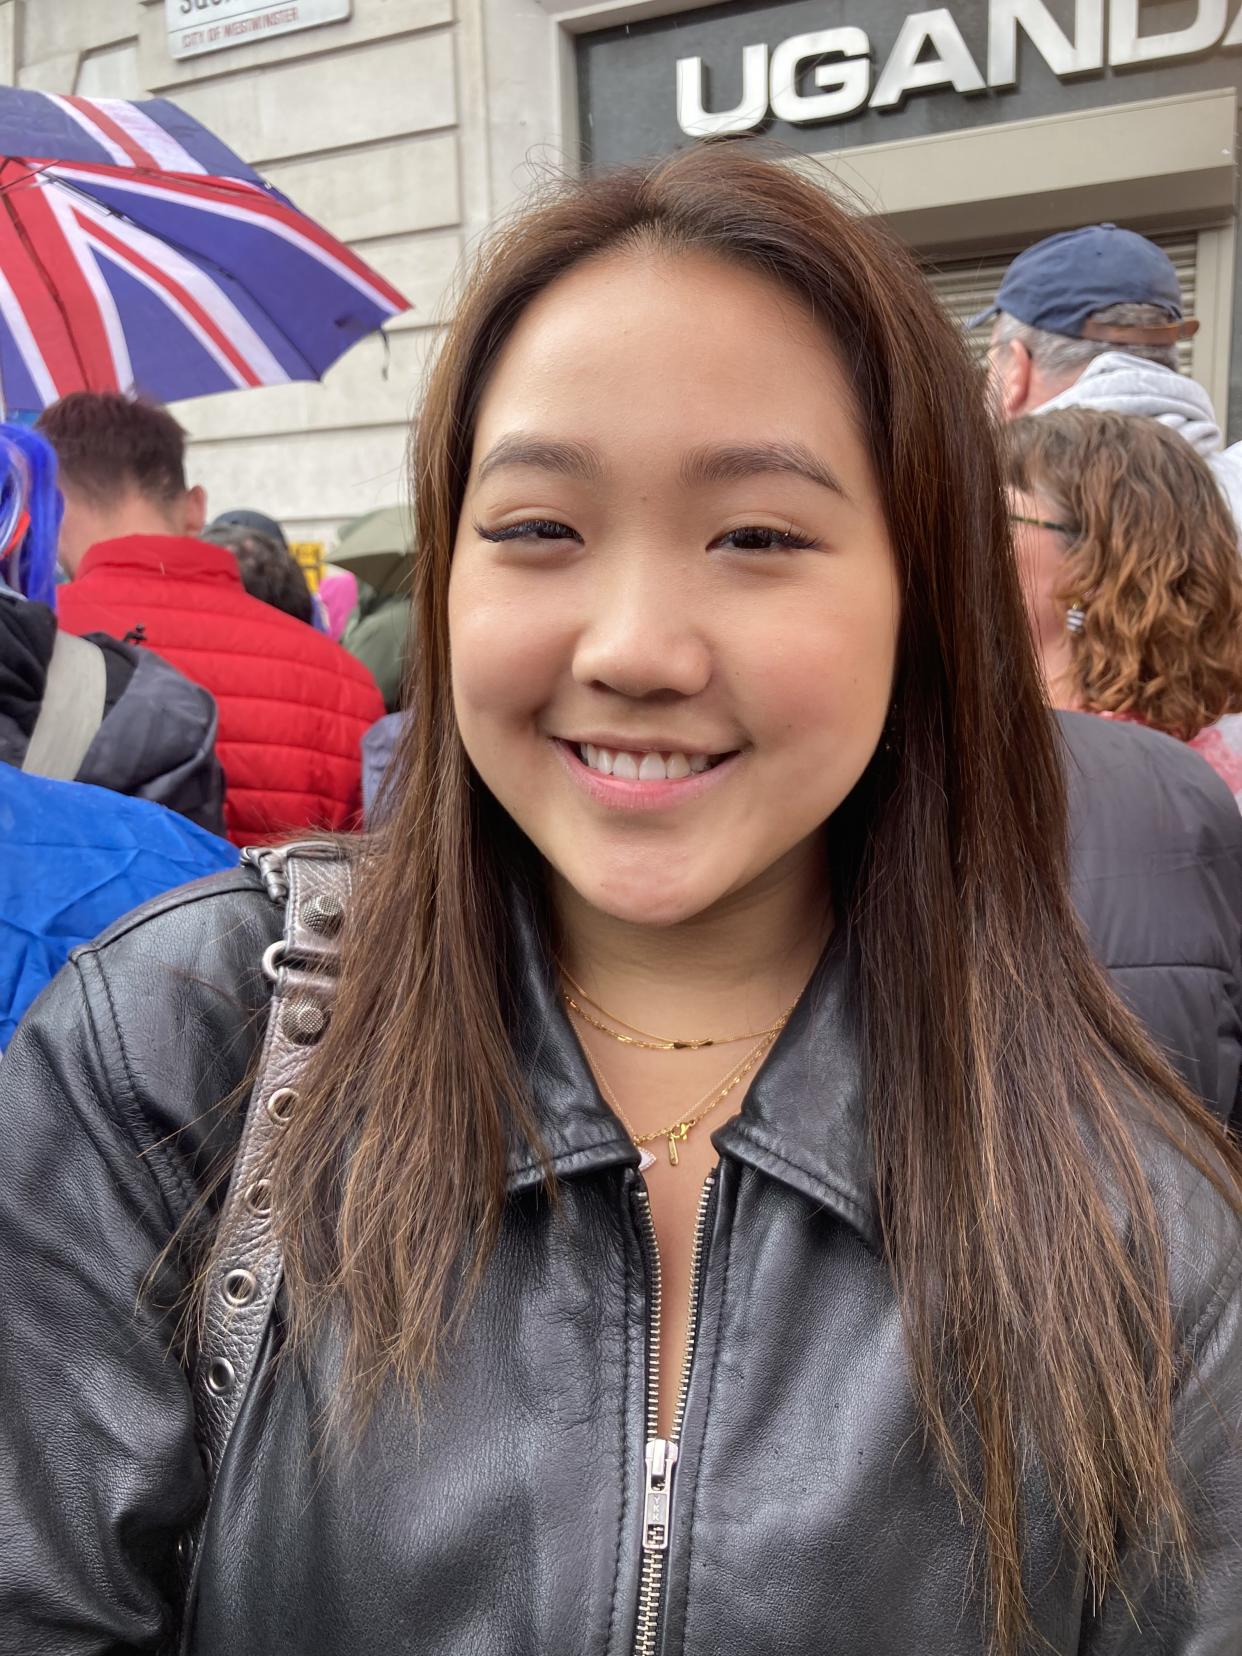 Erika Yip, from Hong Kong, is studying in Oxford. She is 'neutral' on the royals, but got up at 4.30am to witness the coronation. (Yahoo Life UK)